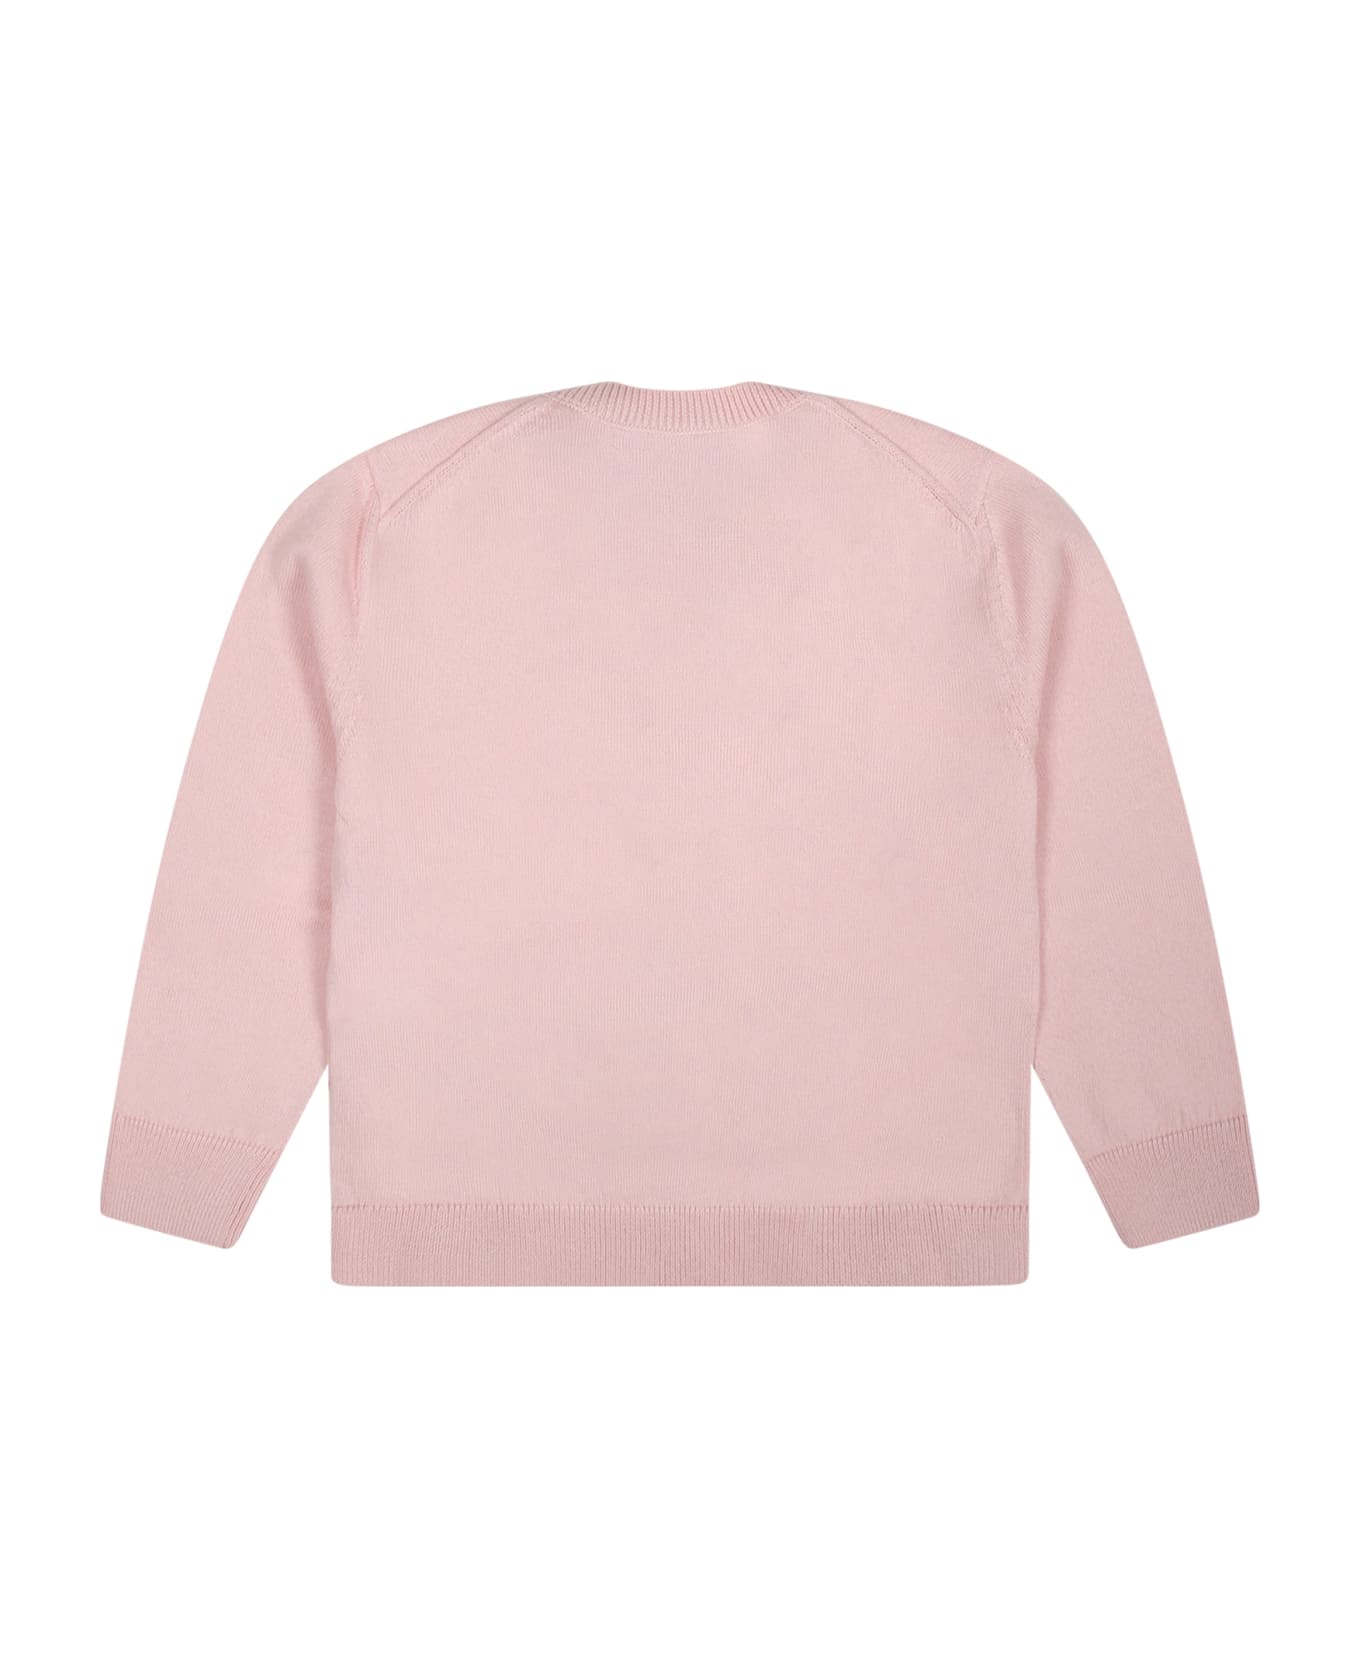 Gucci Pink Cardigan For Baby Girl With Logo - Pink